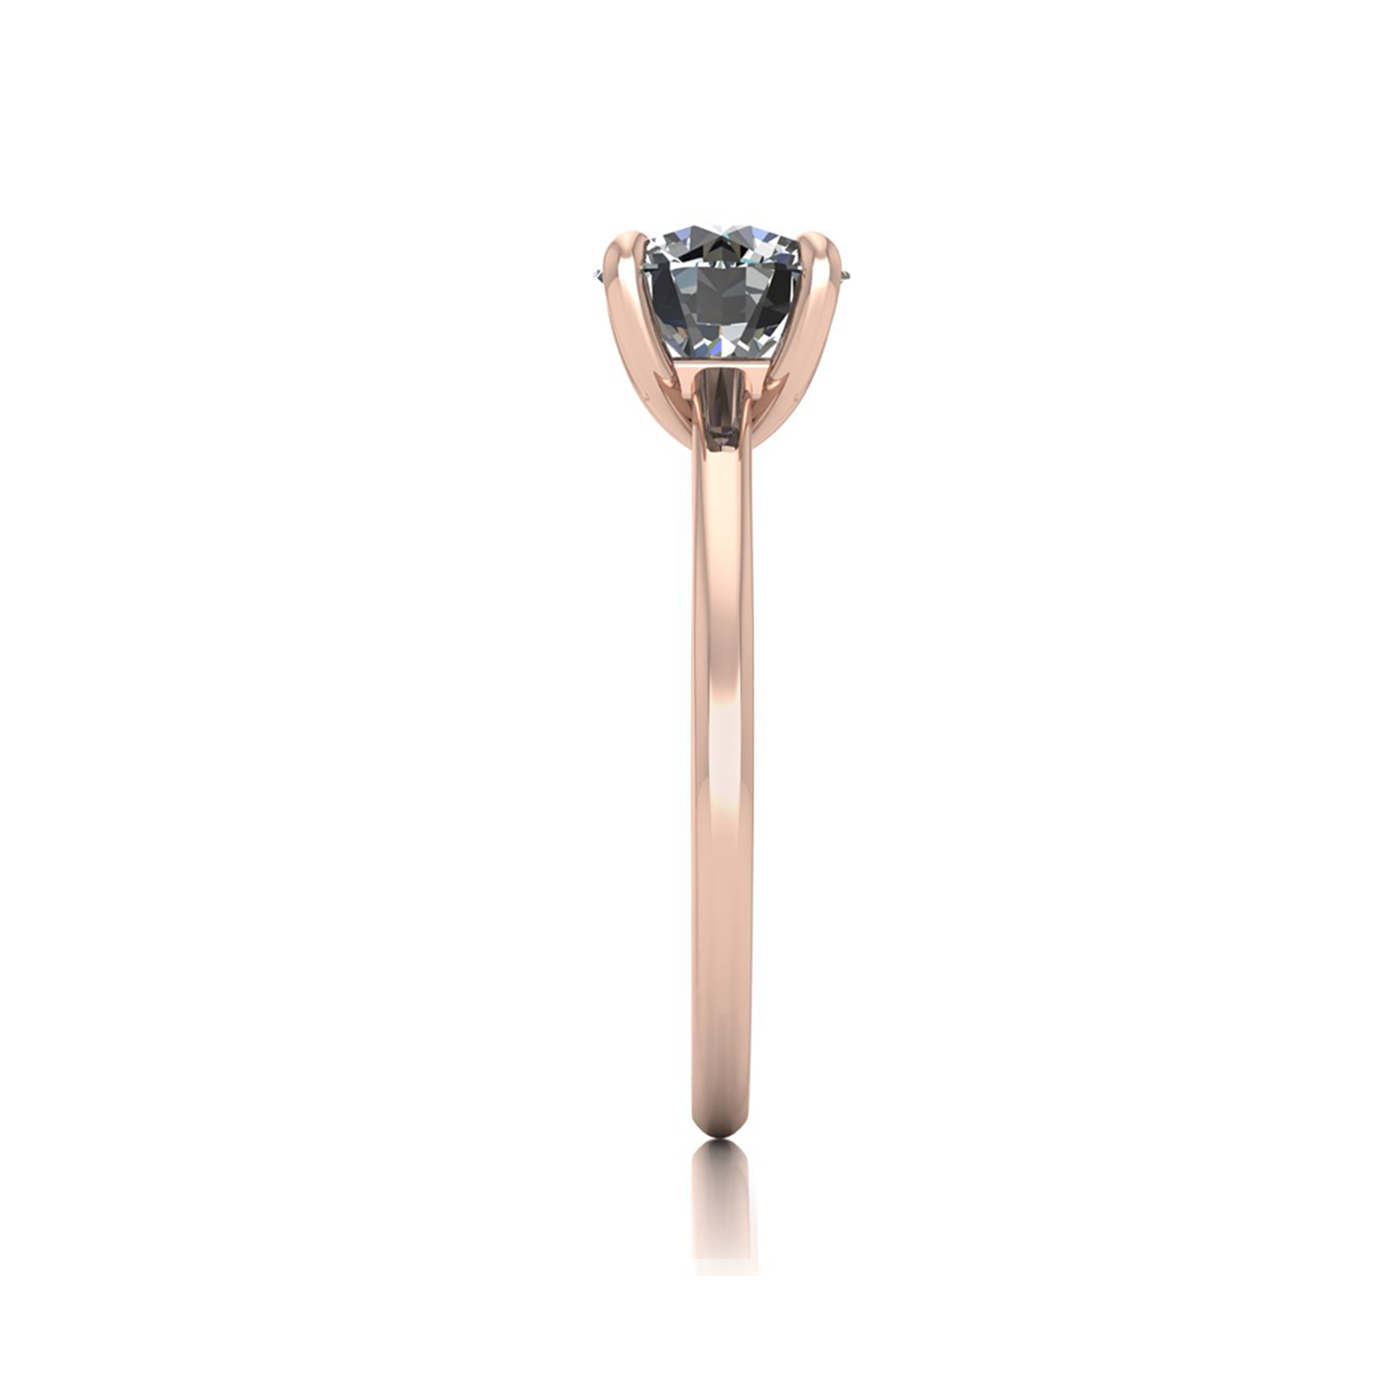 18k rose gold 1.5ct 4 prongs solitaire round cut diamond engagement ring with whisper thin band